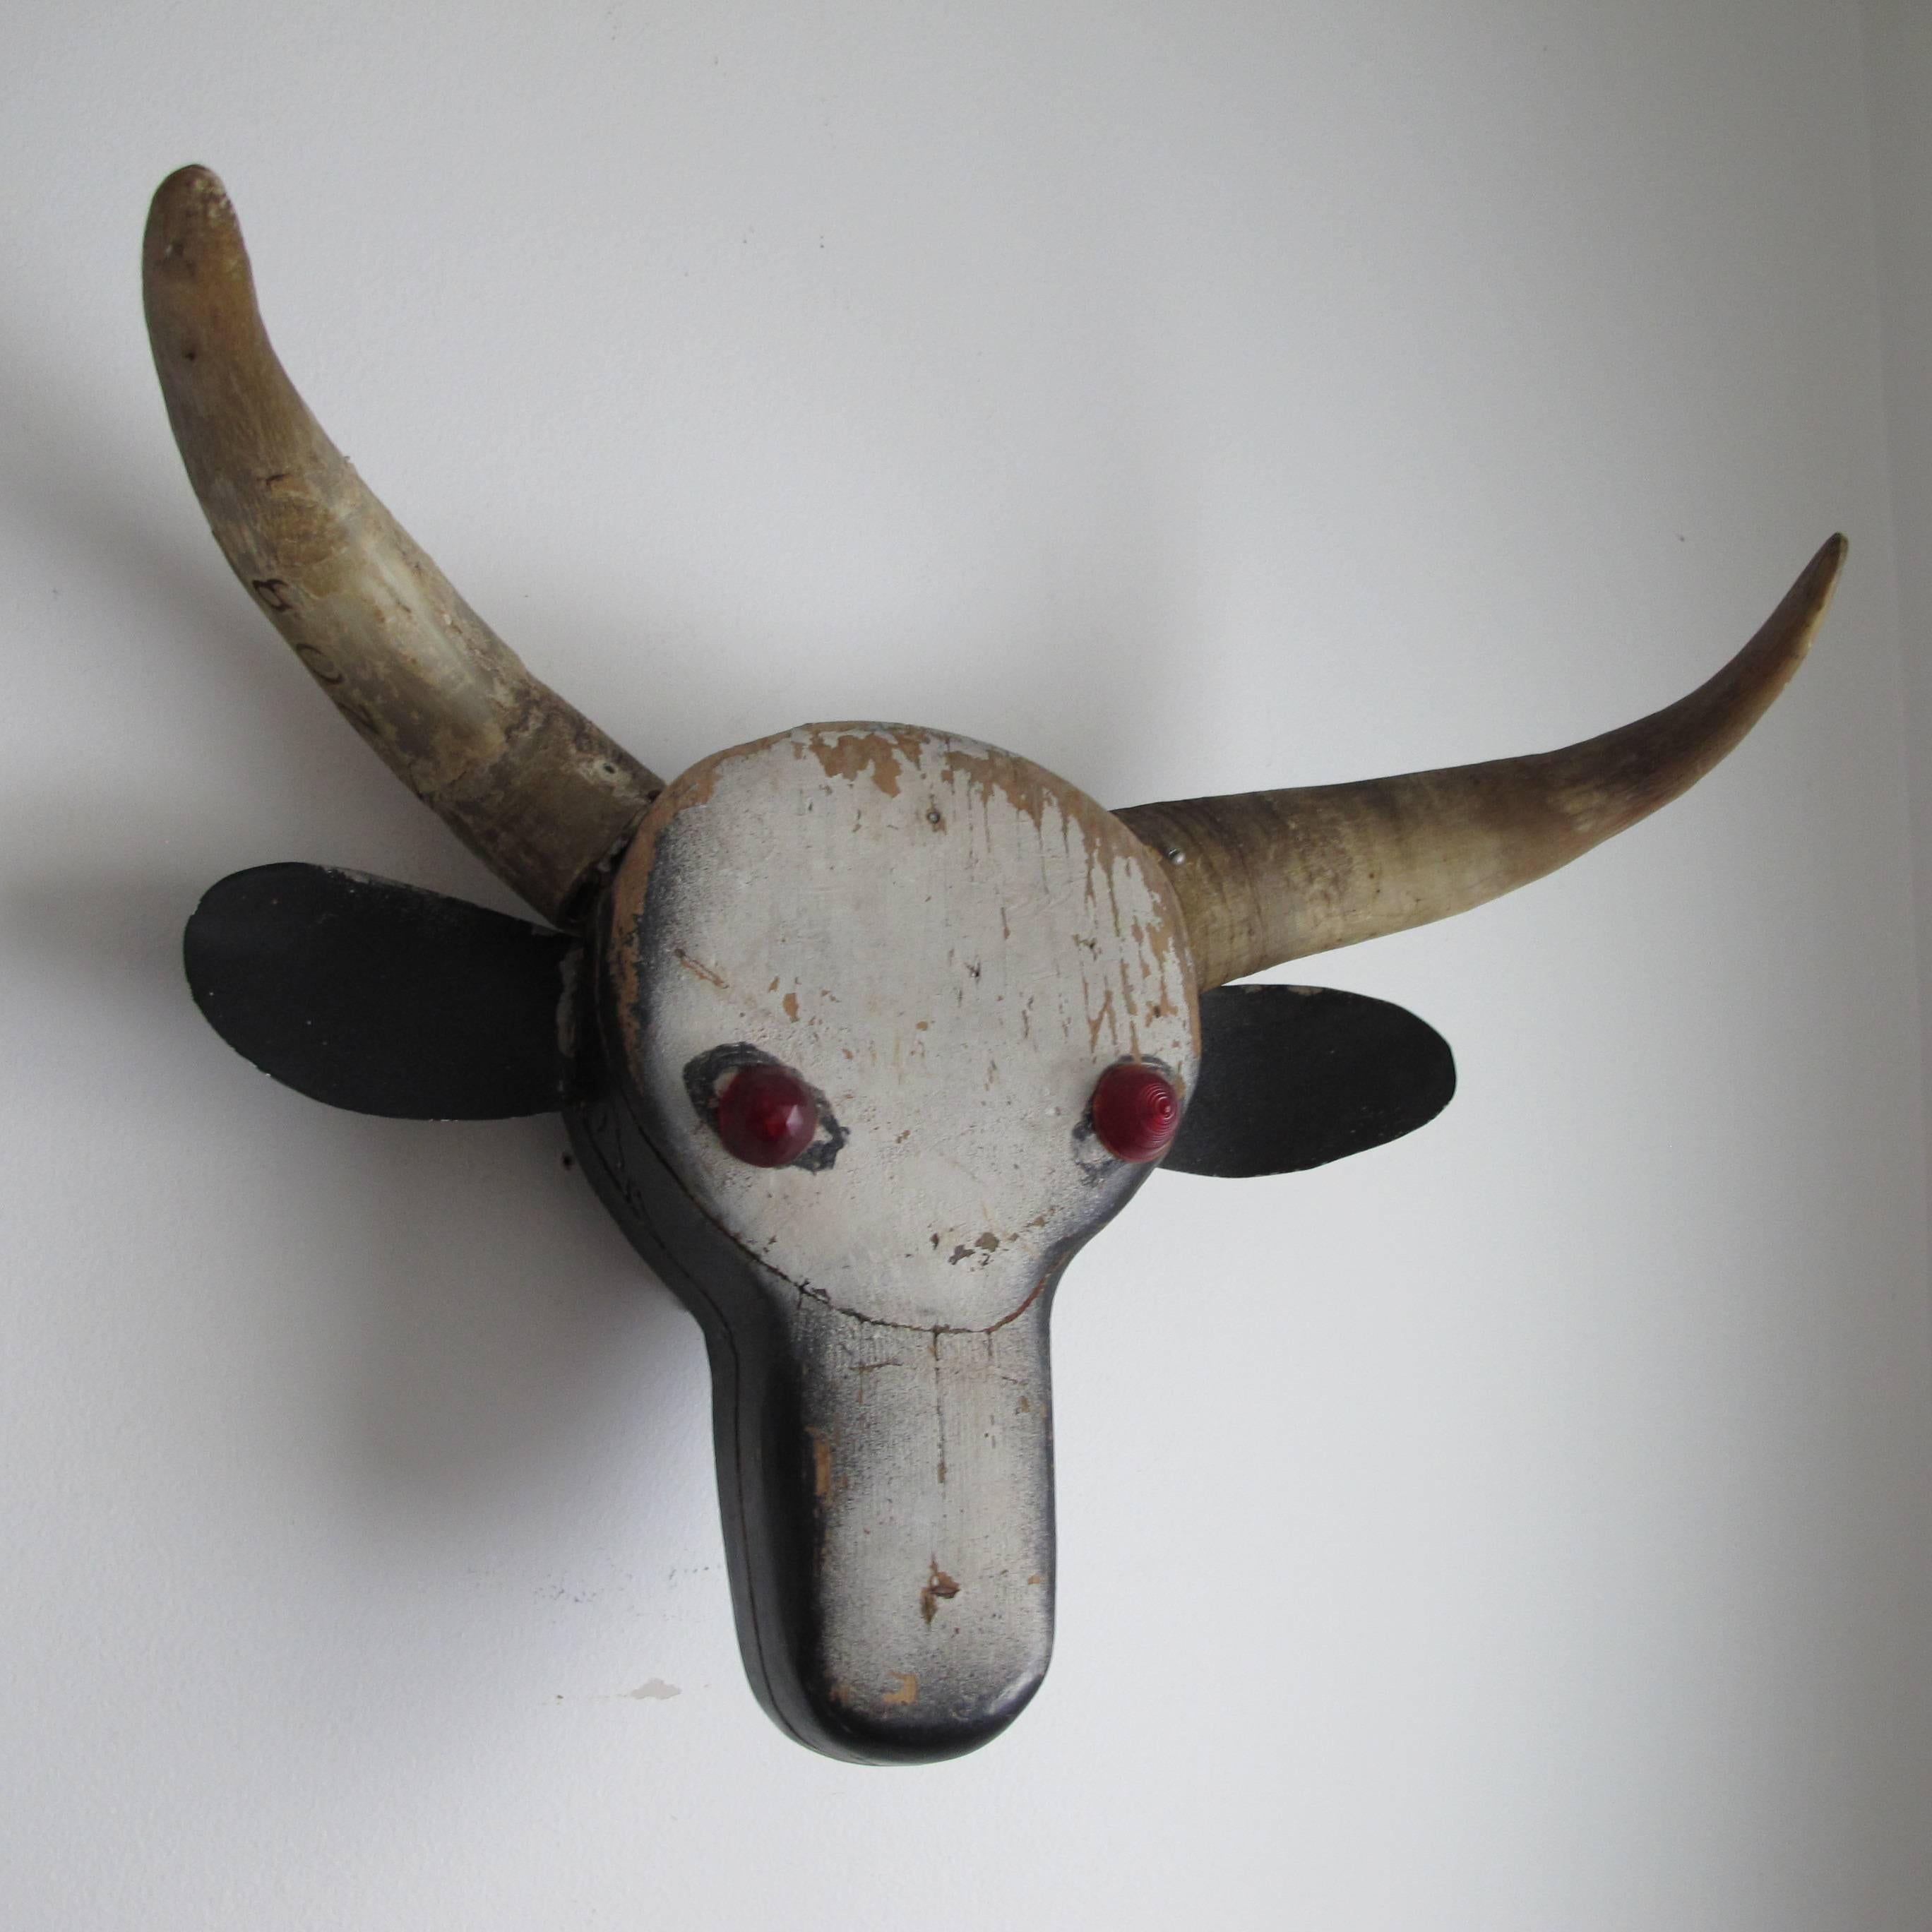 Carved and assembled wood steer head with applied horns and eyes of bike reflectors.
Made by an unknown artist to hang on a wall instead of an actual animal head.